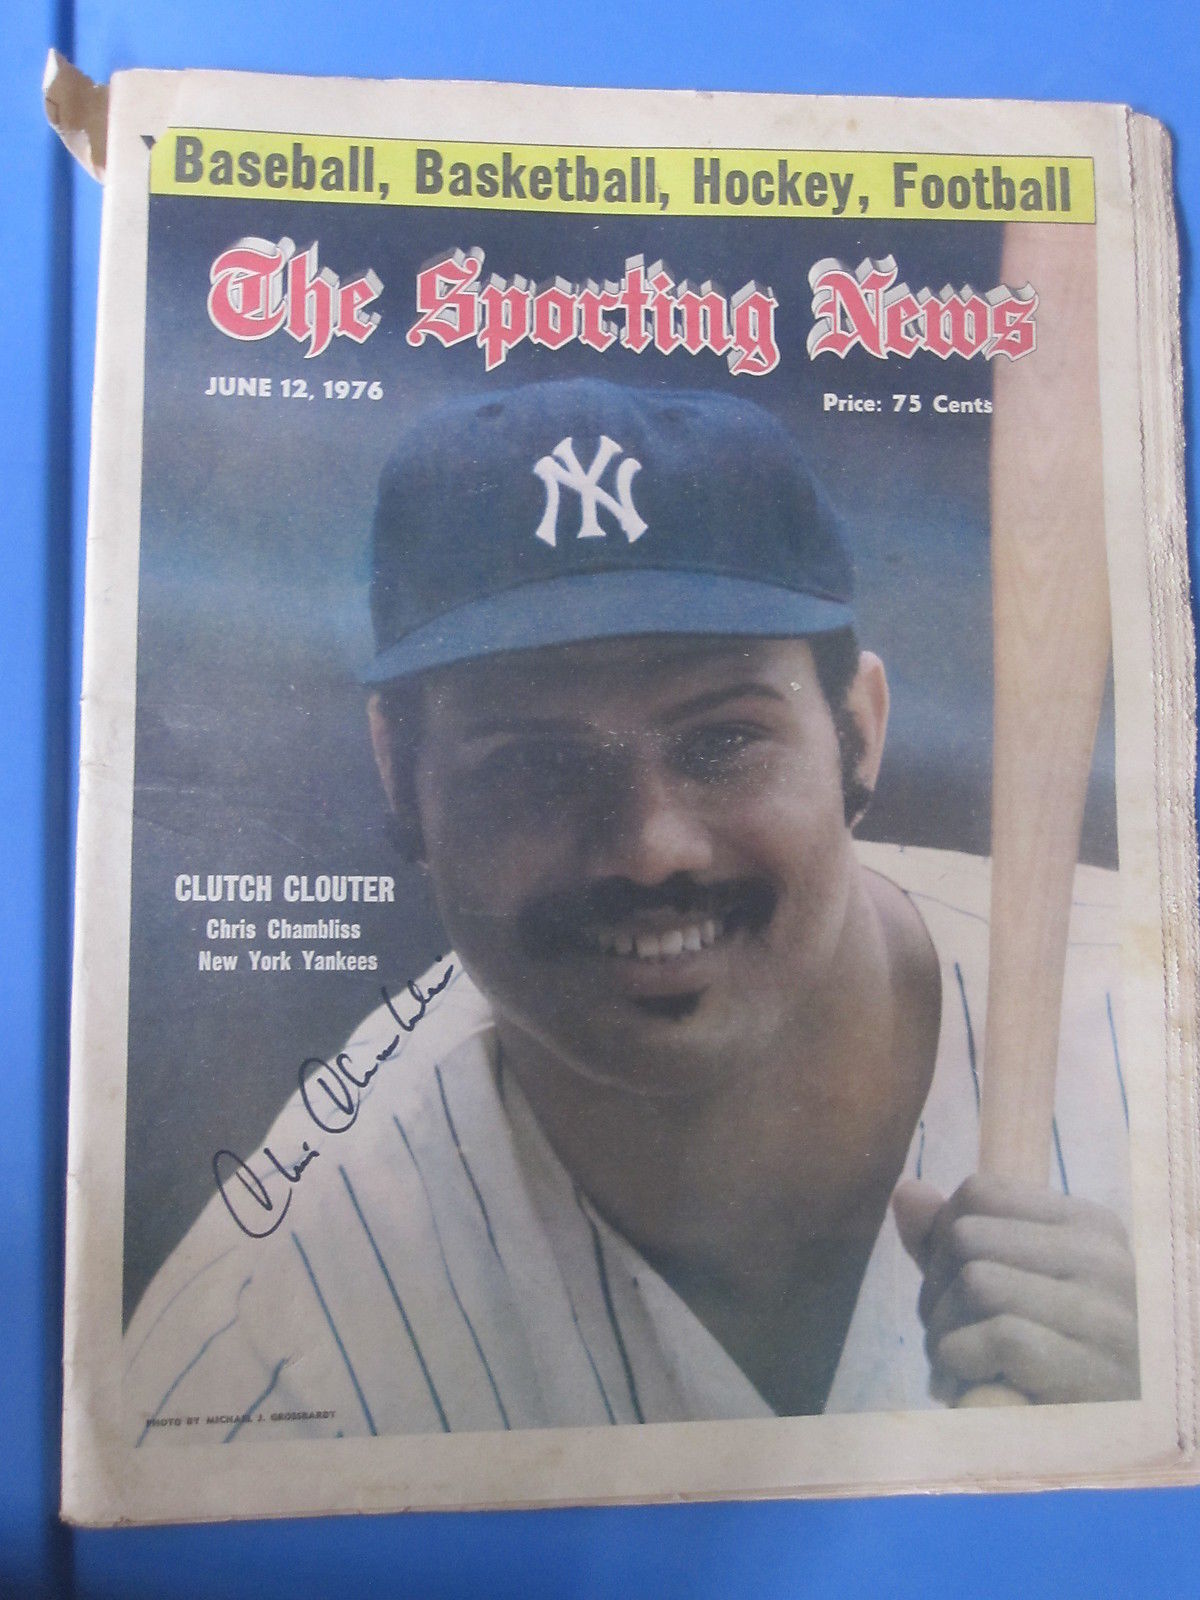 CHRIS CHAMBLISS SIGNED AUTOGRAPHED 1976 THE SPORTING NEWS New York Yankees